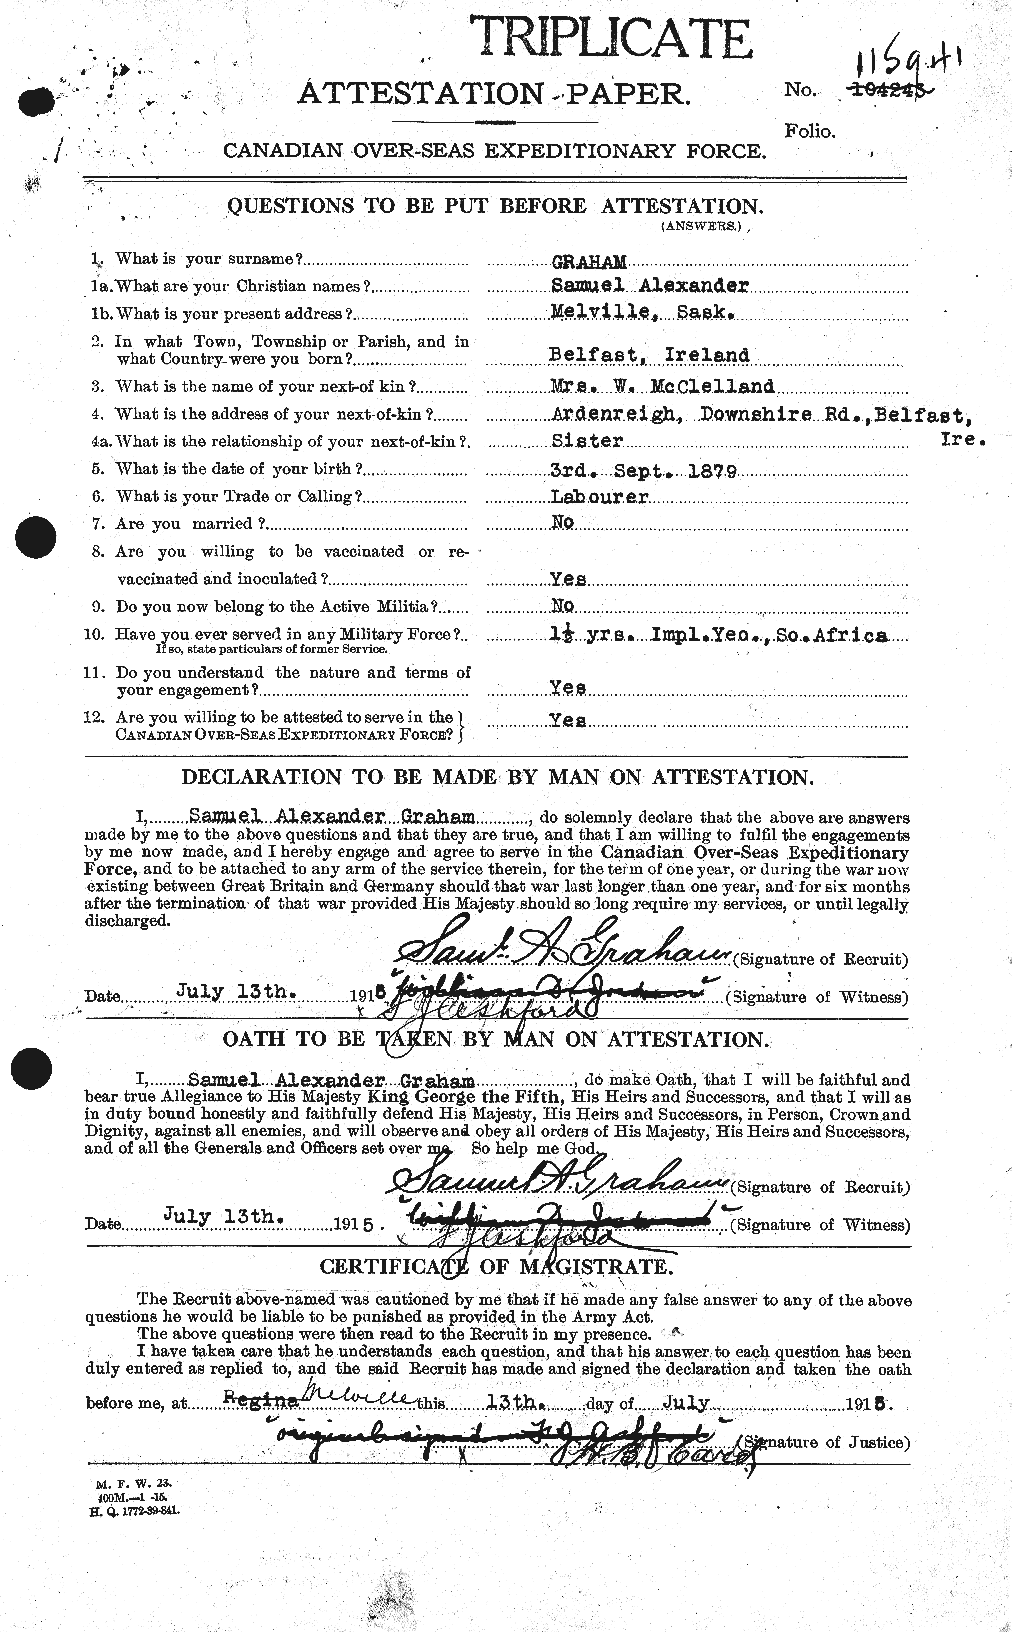 Personnel Records of the First World War - CEF 359454a